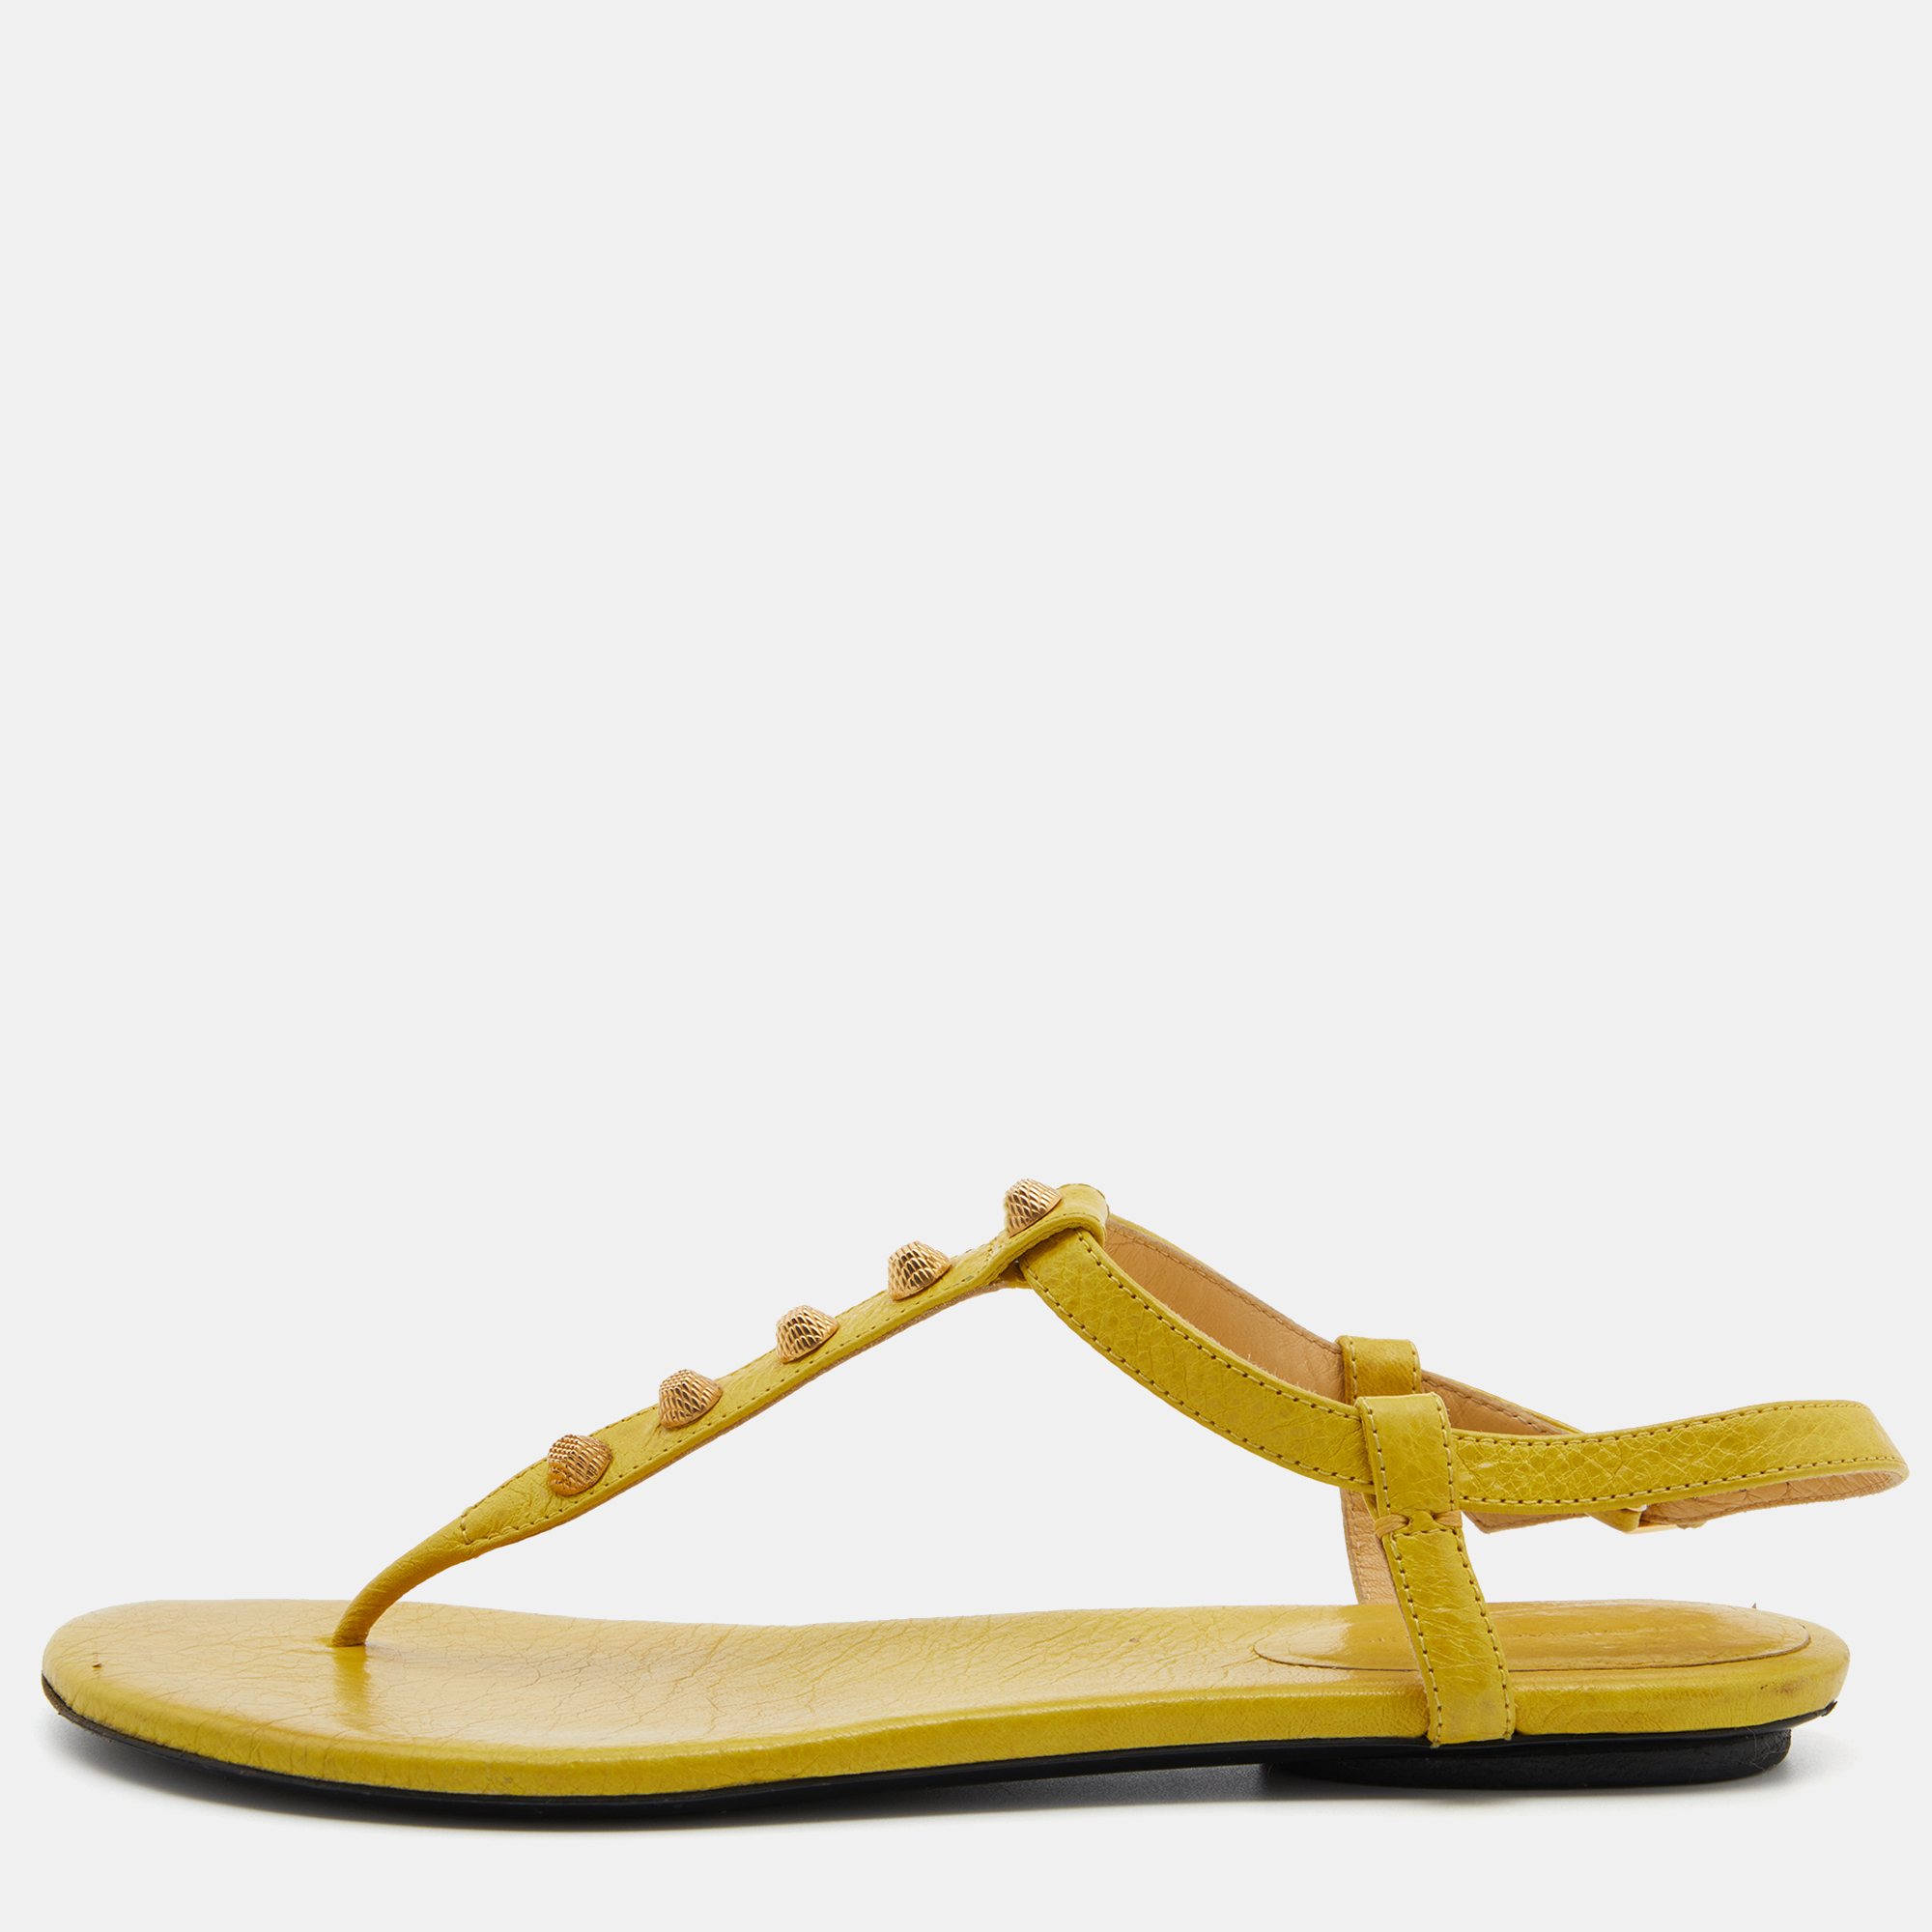 Balenciaga yellow leather arena studded thong sandals size 40